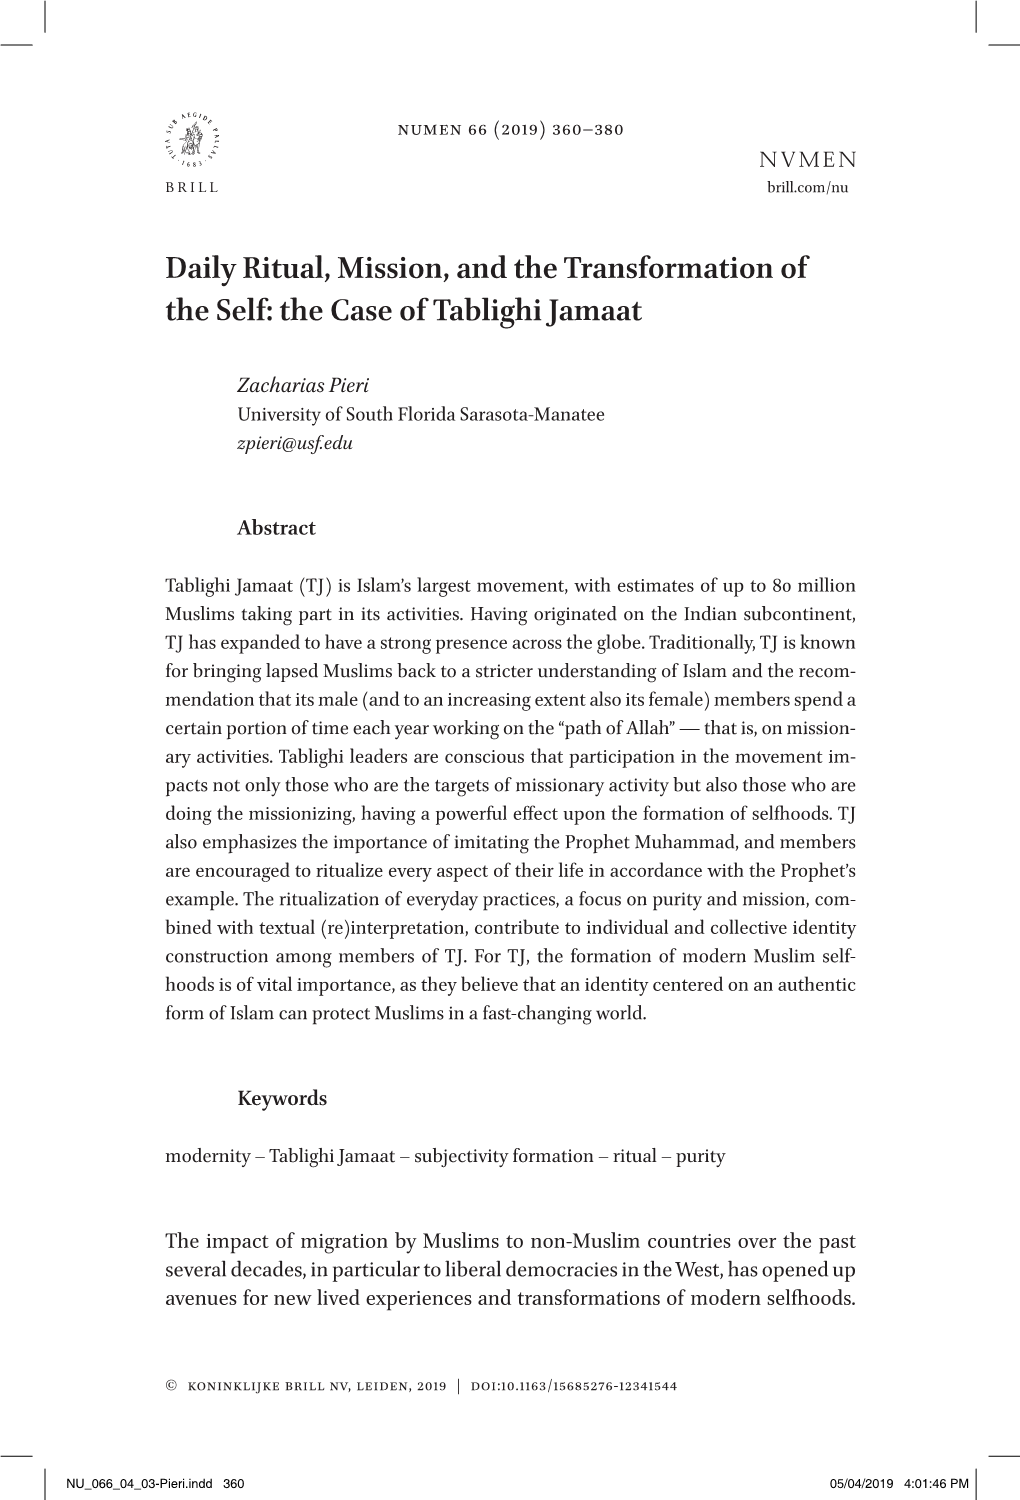 Daily Ritual, Mission, and the Transformation of the Self: the Case of Tablighi Jamaat